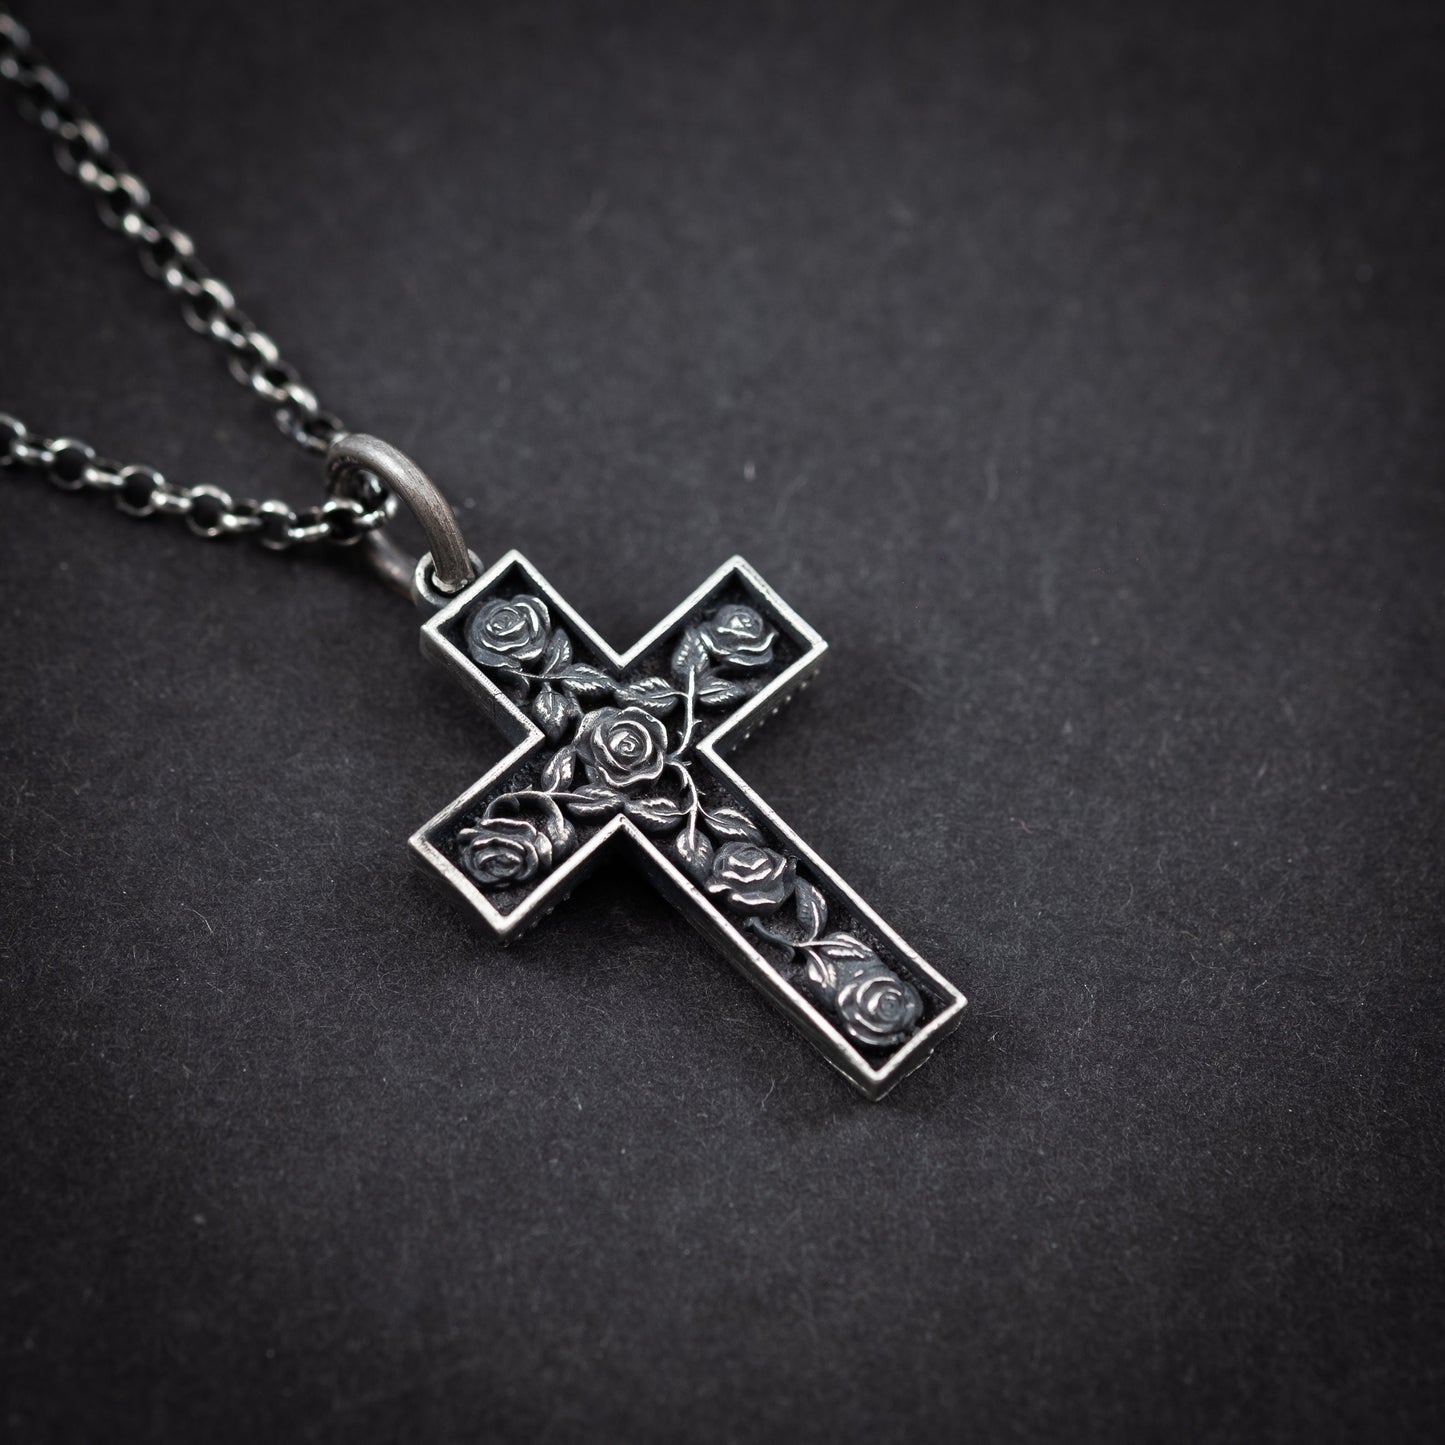 Mens Cross with Roses necklace, Christian Strength pendant necklace, Baptism Christian gifts, Religious handmade jewelry, Christmas gifts